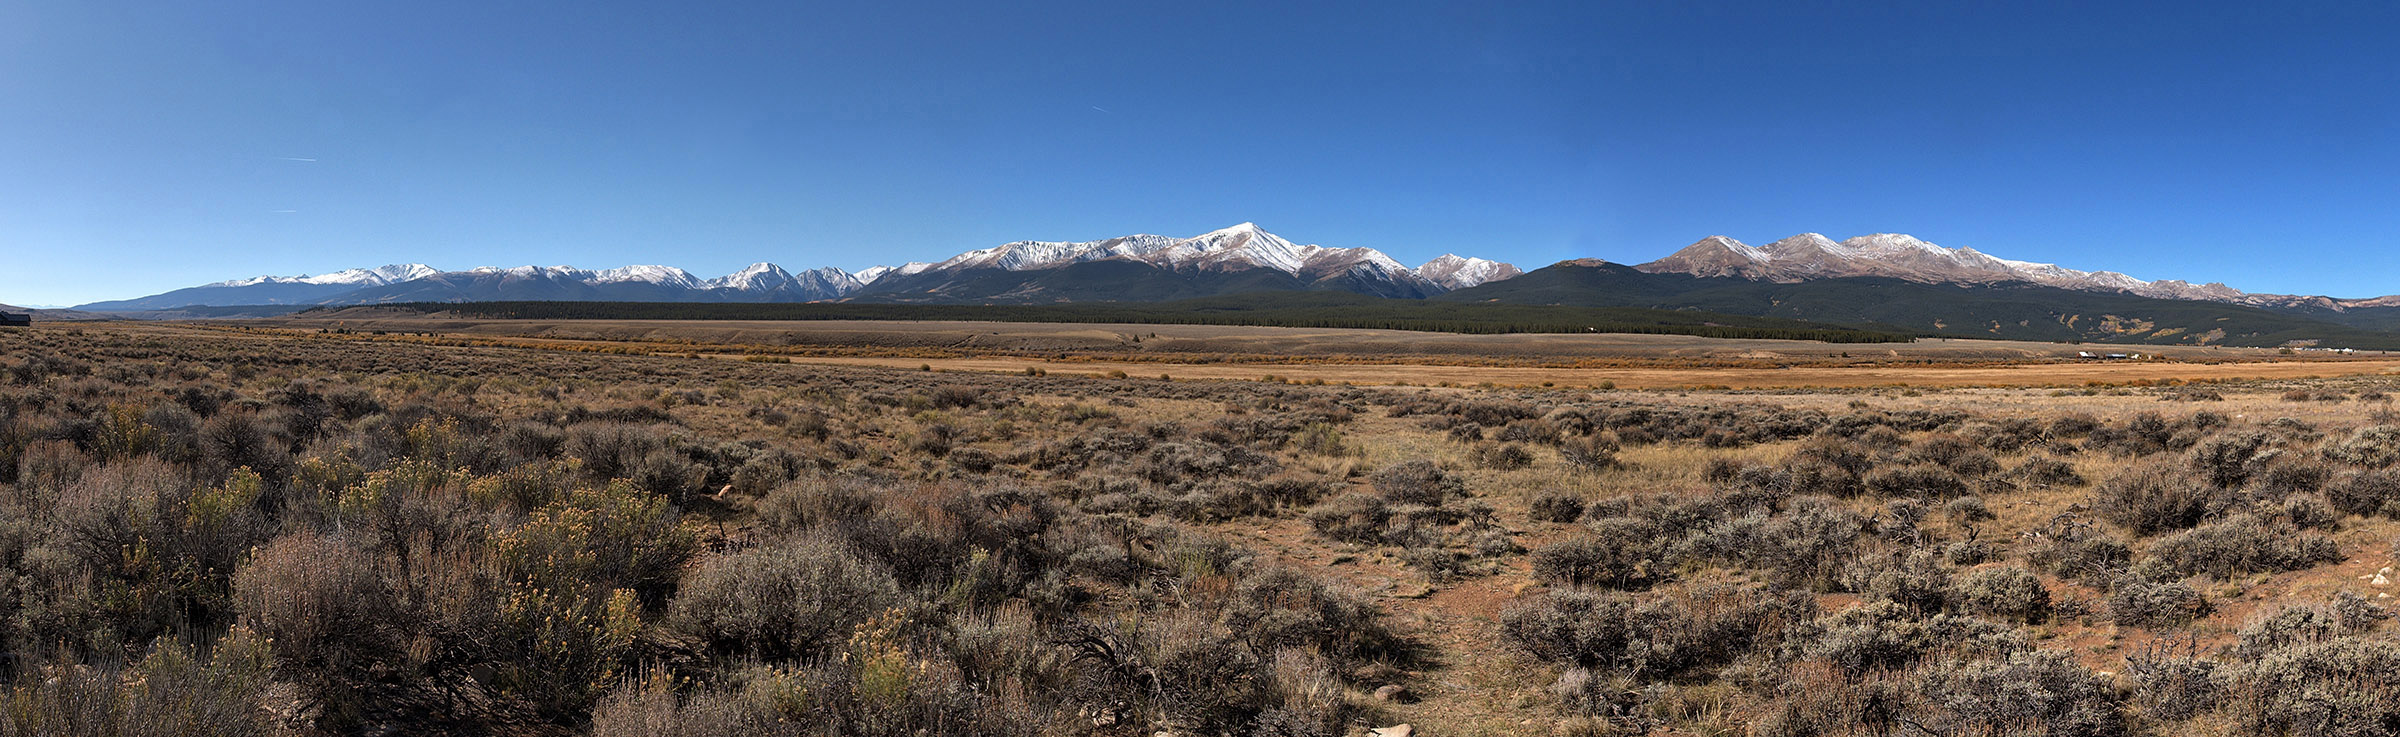 Sawatch Mountain Range viewed from the Arkansas River Valley along US Highway 24 south of Leadville.  The Arkansas Valley is at the northern end of the Rio Grande Rift which extends from Leadville through New Mexico.